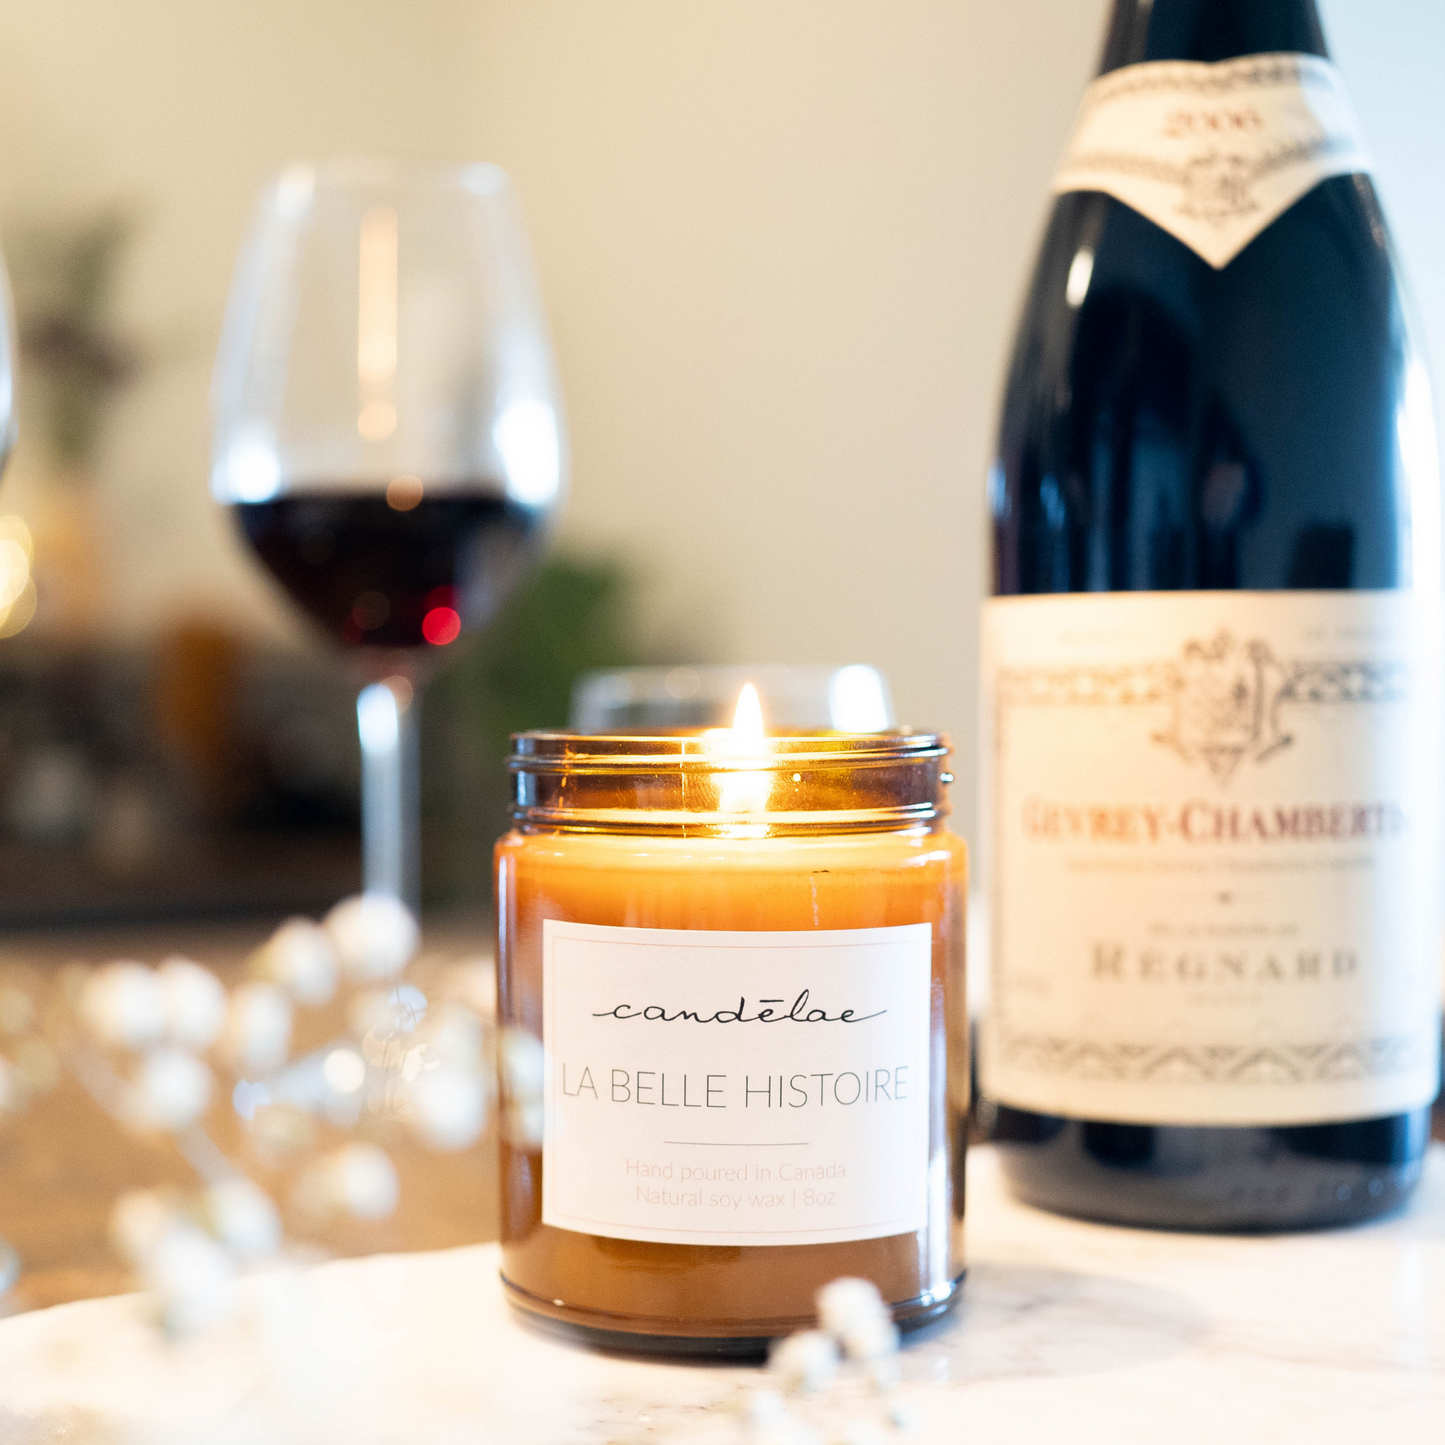 La belle histoire is at the center of the table for Valentine's Day next to a bottle of French wine